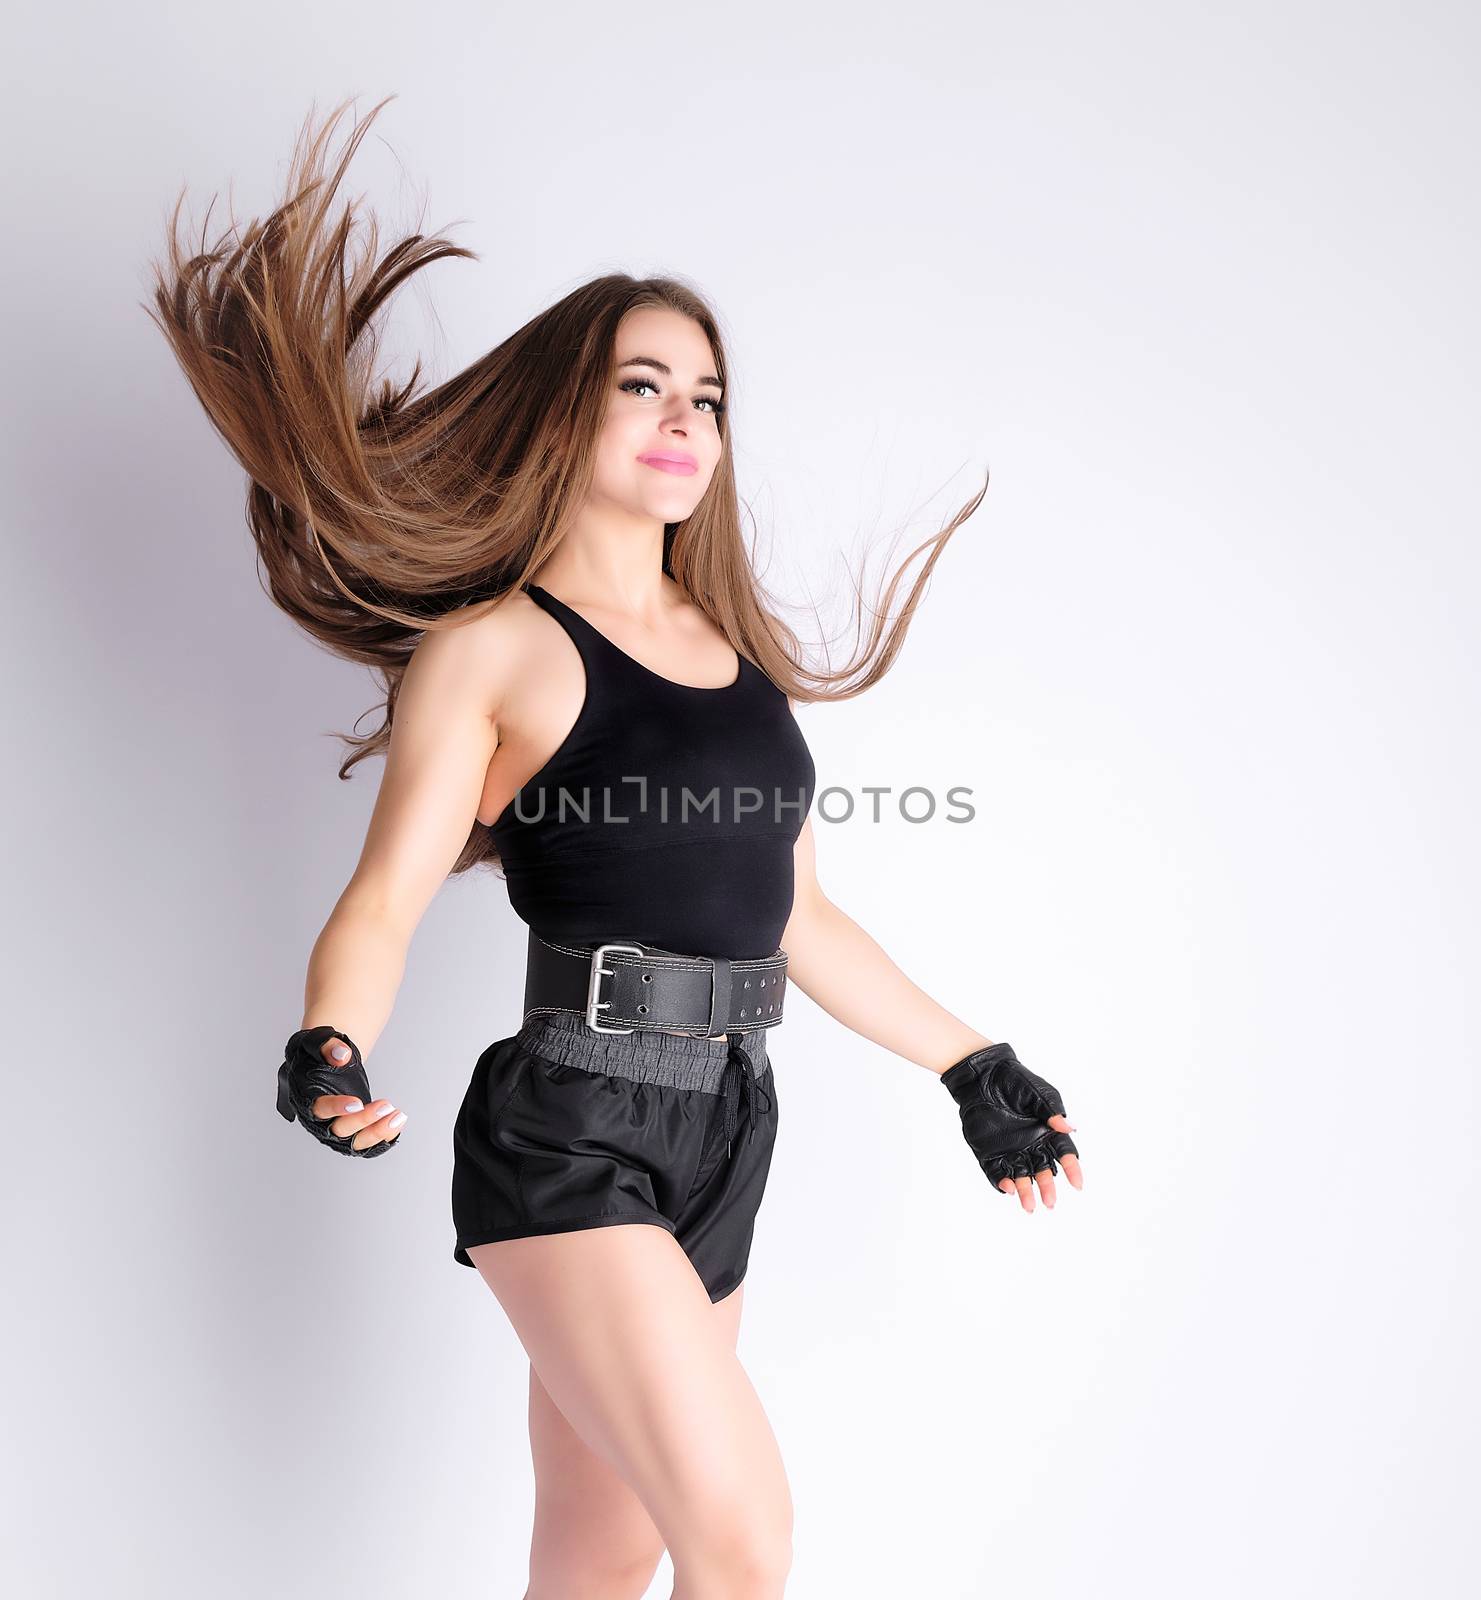 beautiful girl with a sports figure stands on a white background and throws up dark long blonde hair with her hands, athlete is dressed in short shorts and a black top, white background